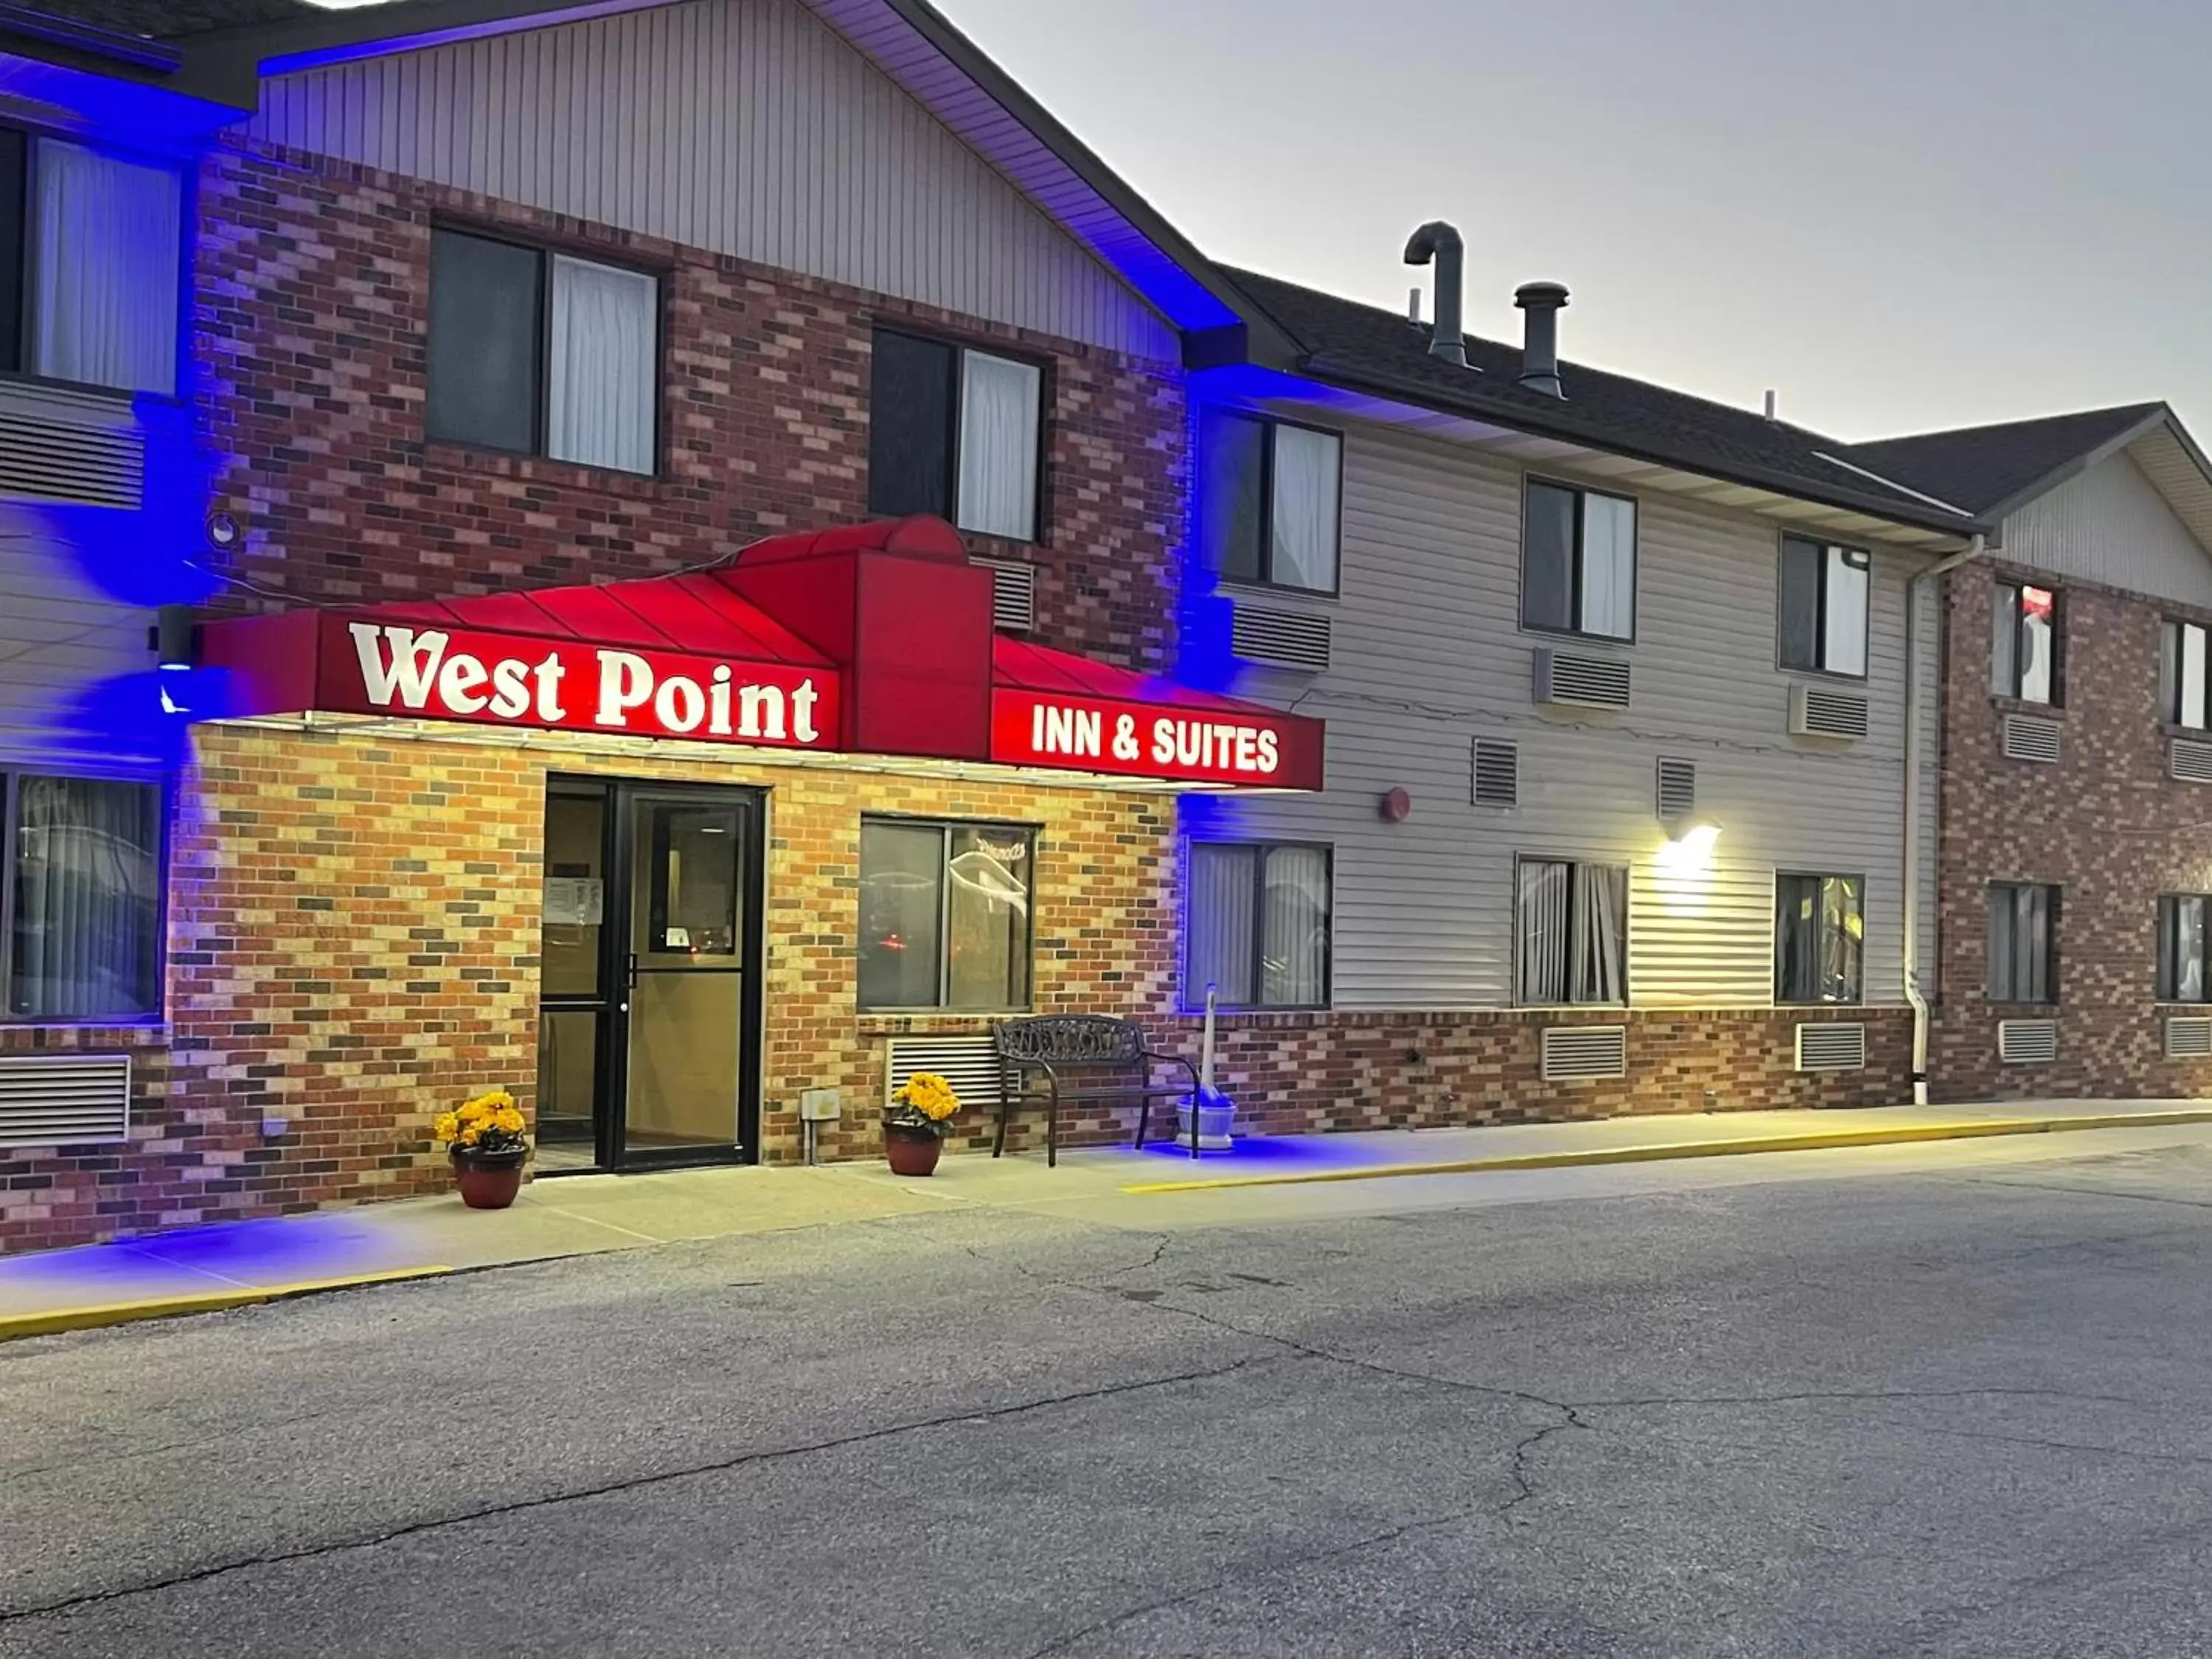 Property building in West Point Inn & Suites